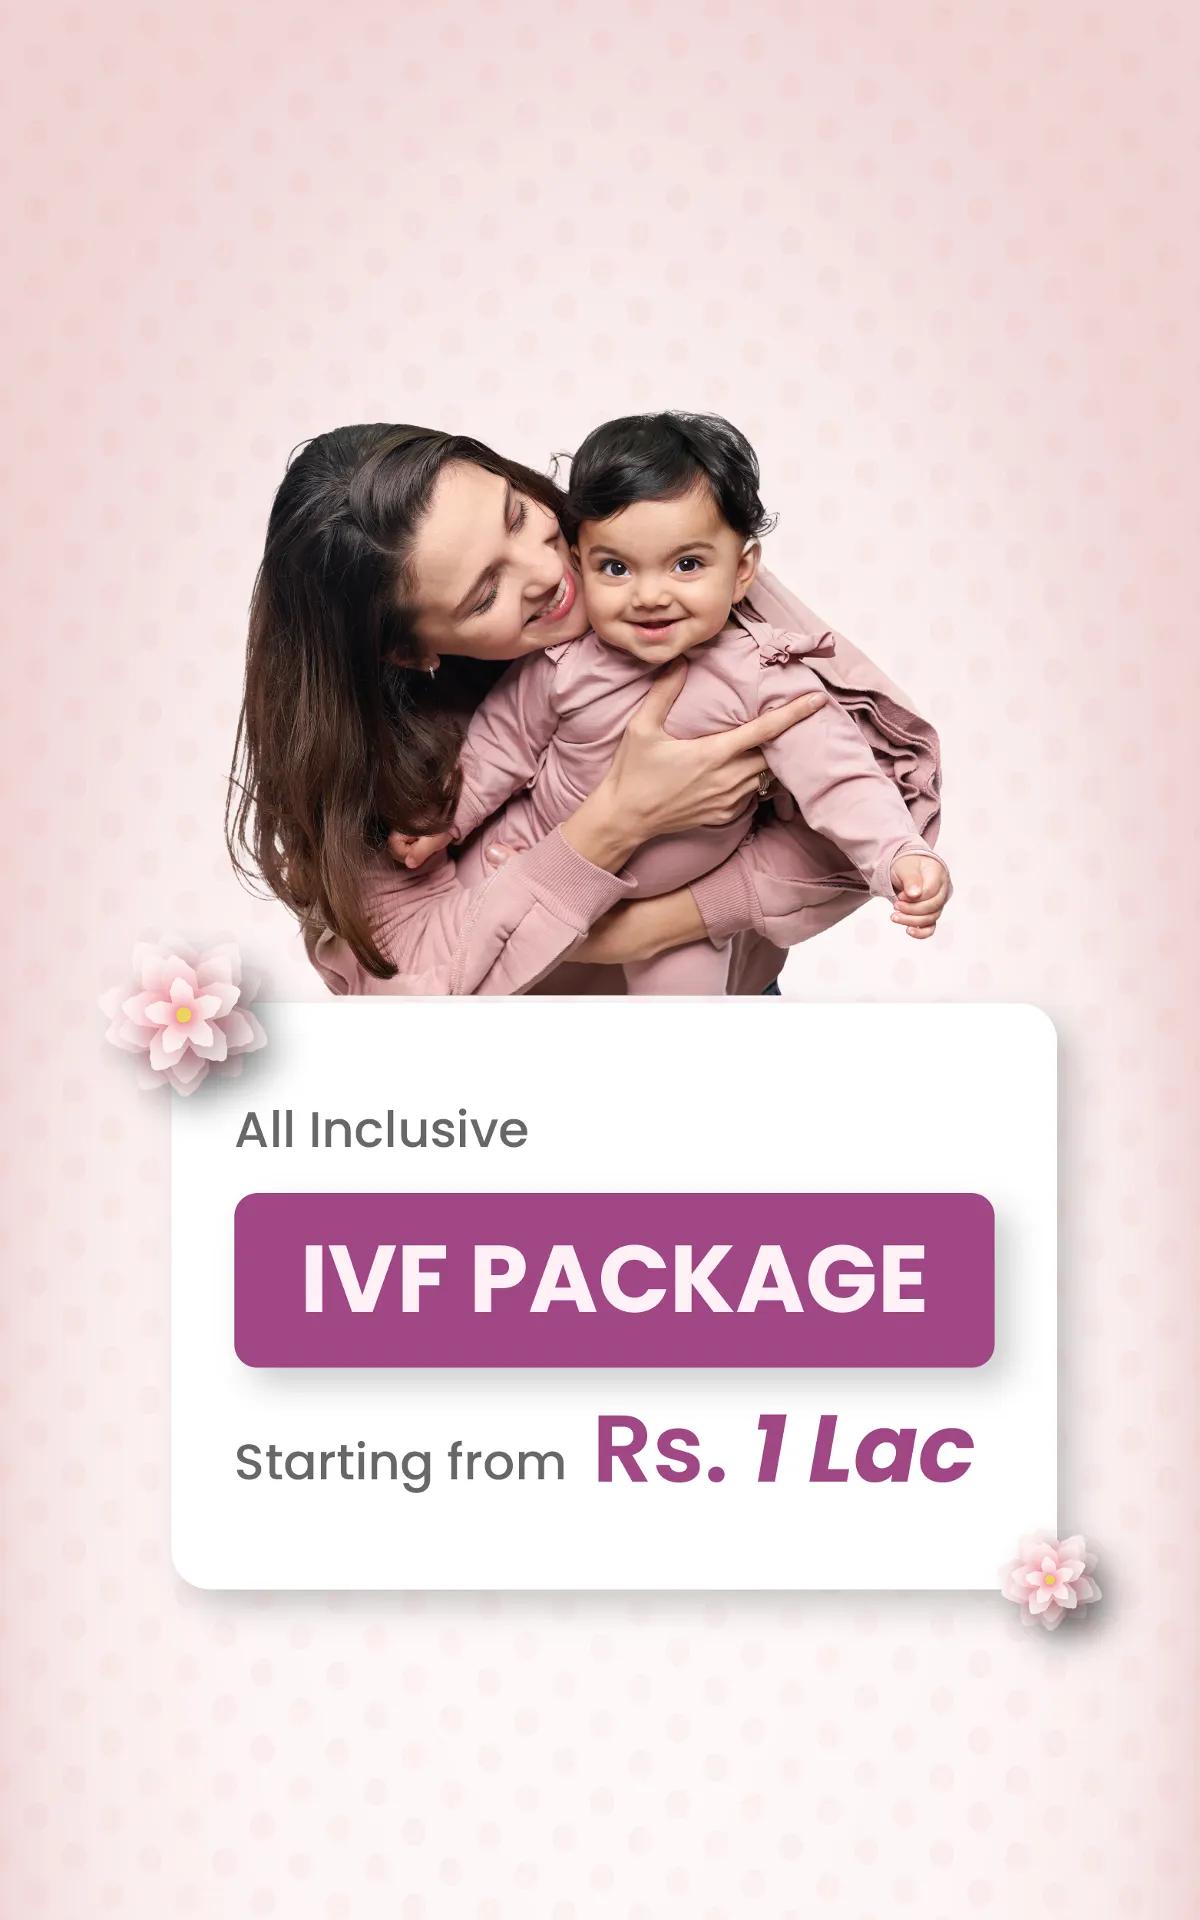 Best IVF Centre, IVF Journey made easy, True IVF treatment companion